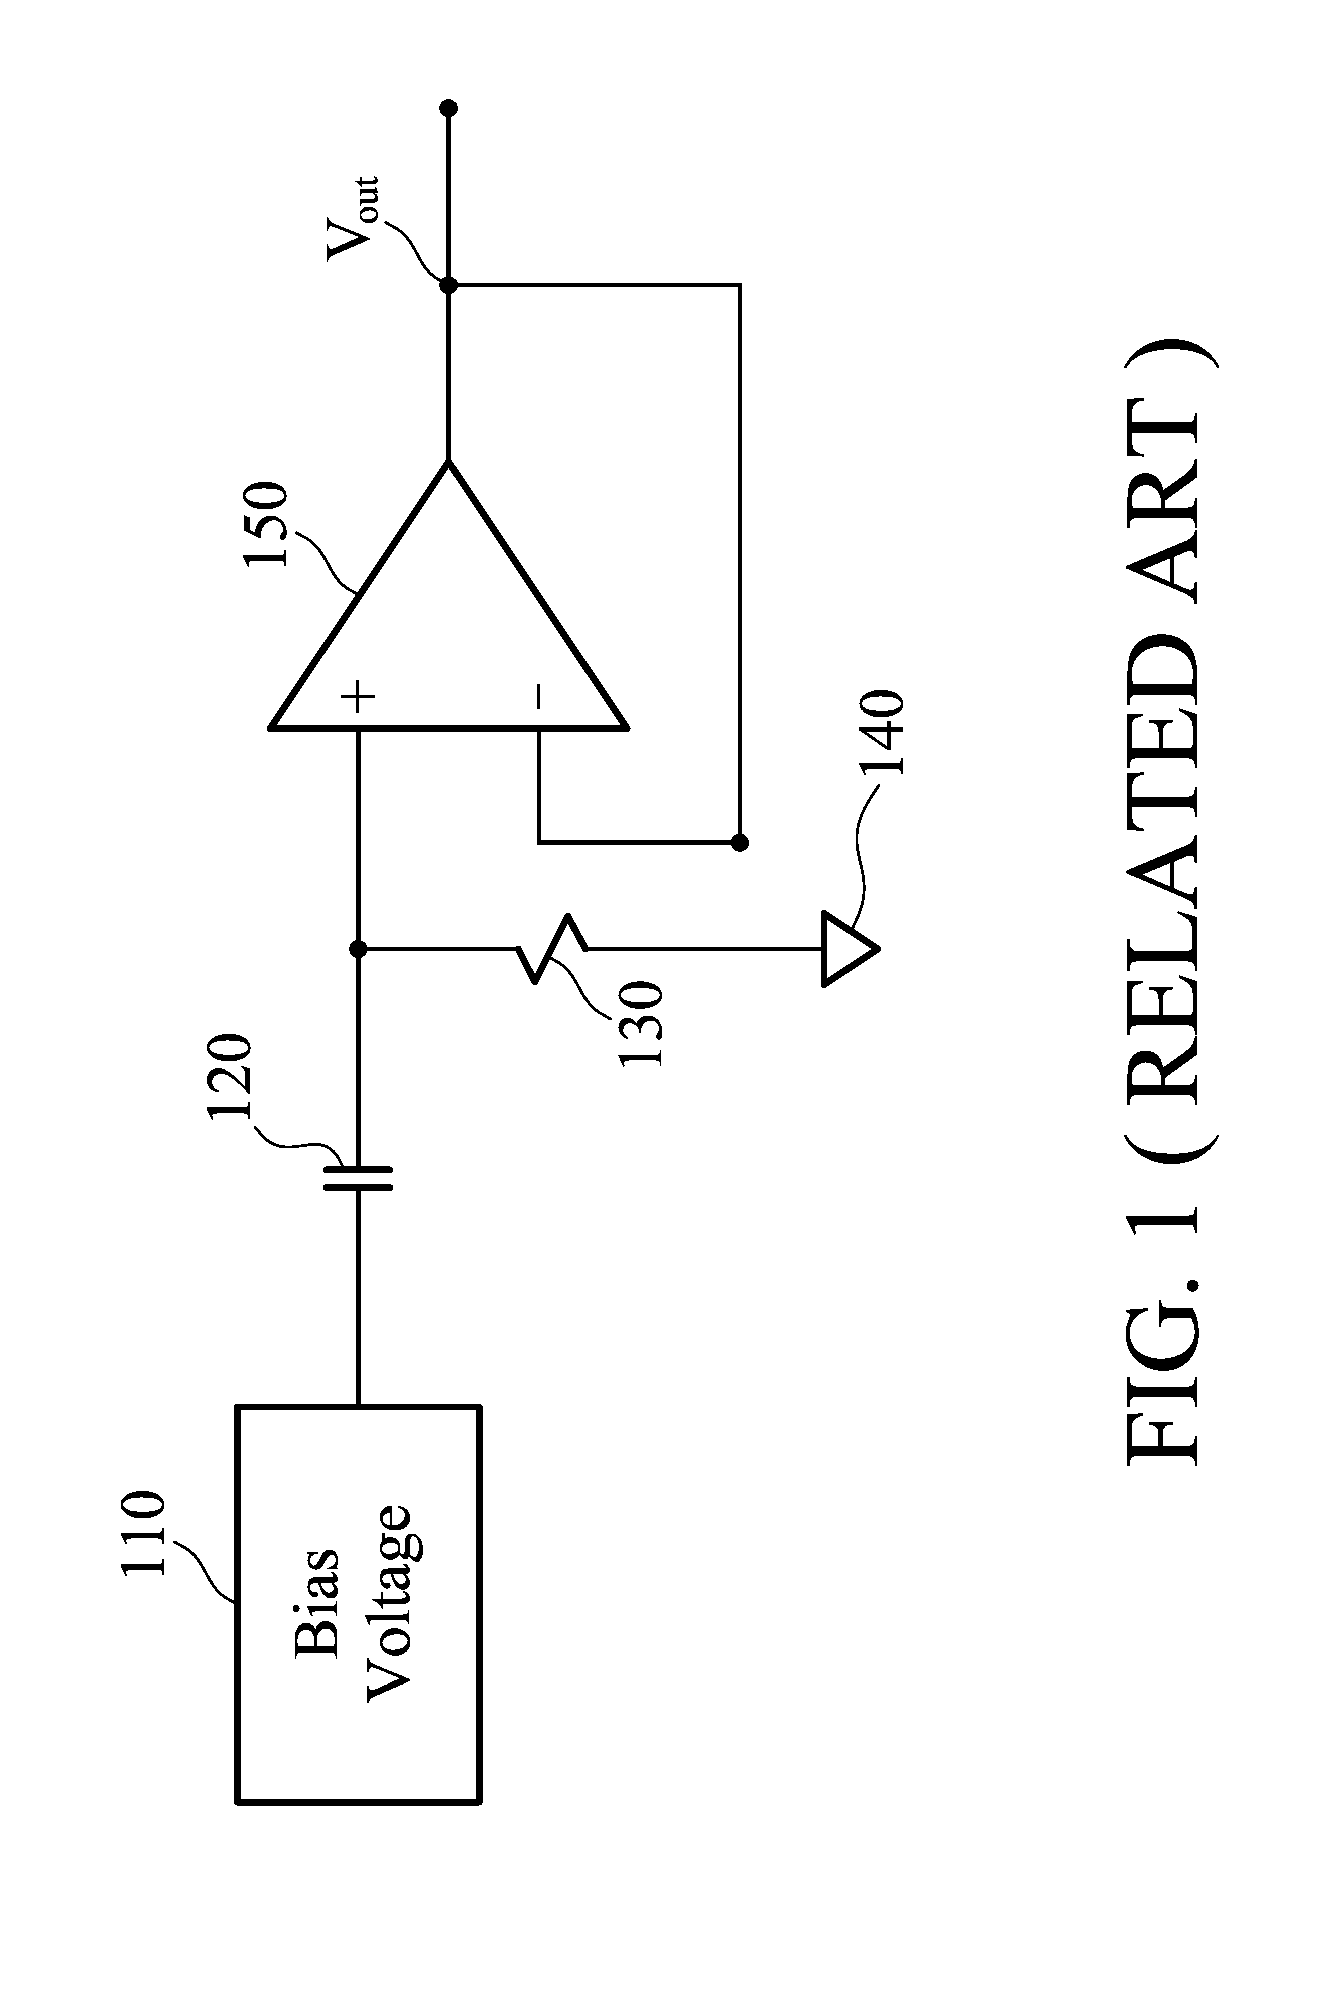 Microphone Preamplifier Circuit and Voice Sensing Devices